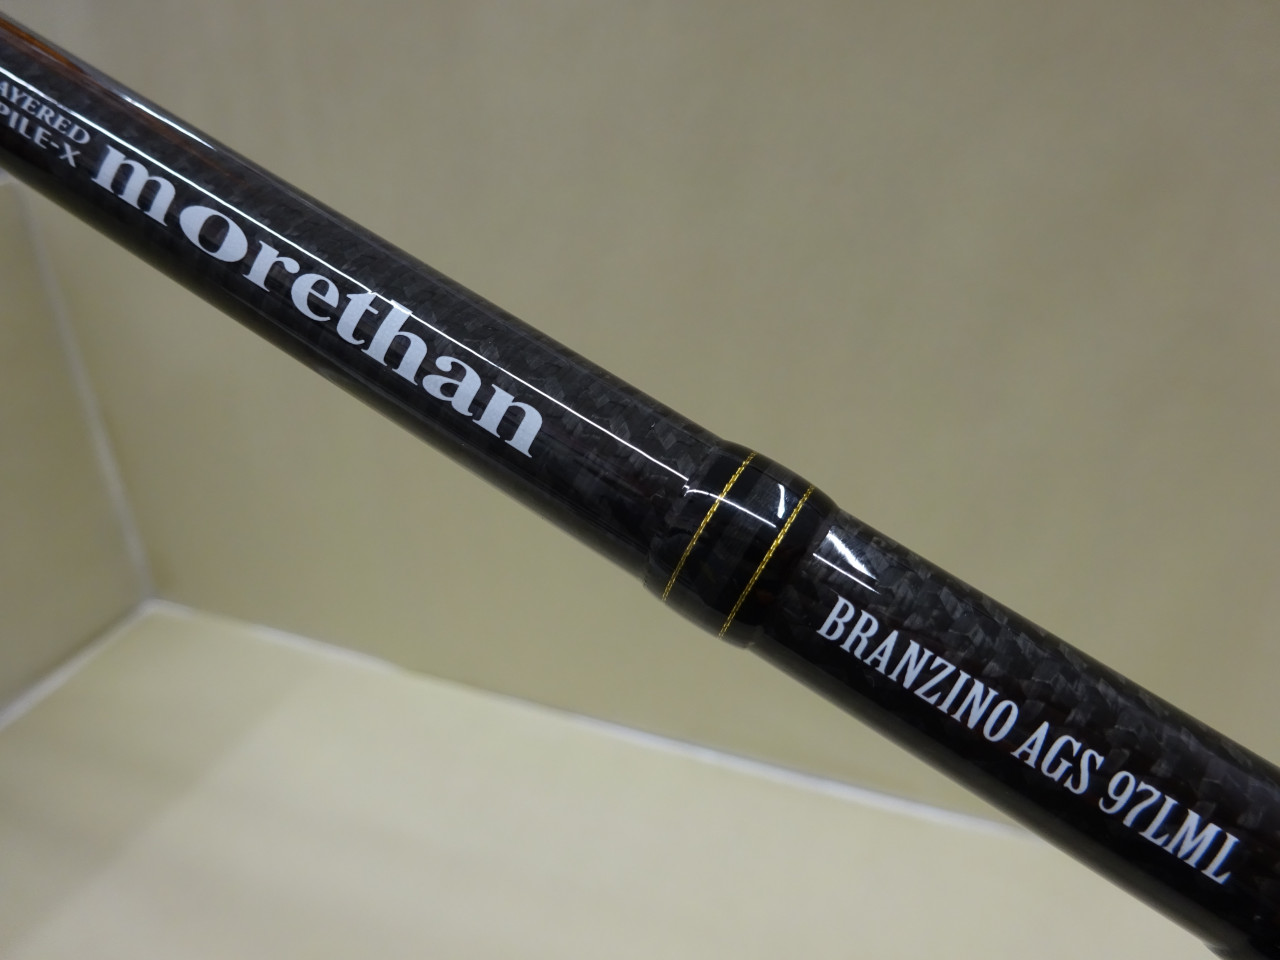 Daiwa MORETHAN BRANZINO AGS 97lml Shore Game Spinning Rod From Japan 903 for sale online | eBay